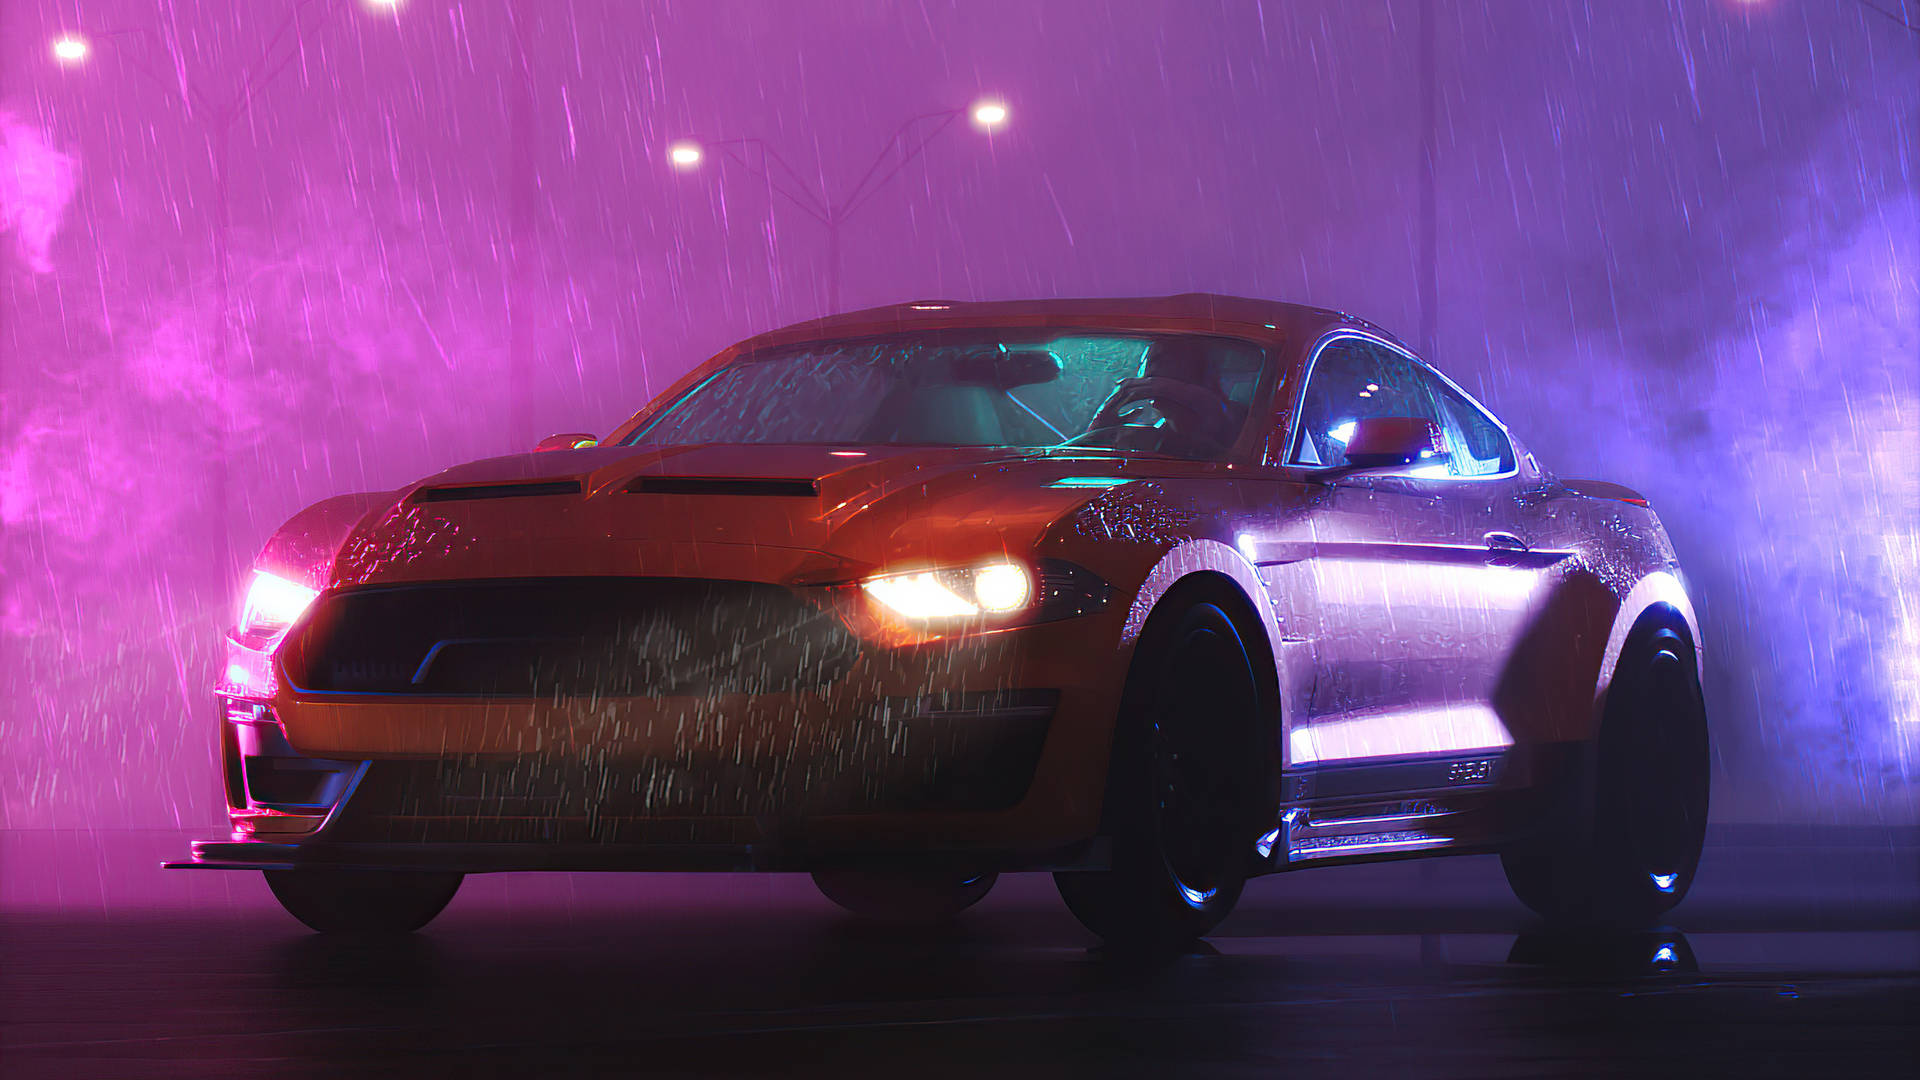 Get Ready to Ride in the Cool Mustang Wallpaper